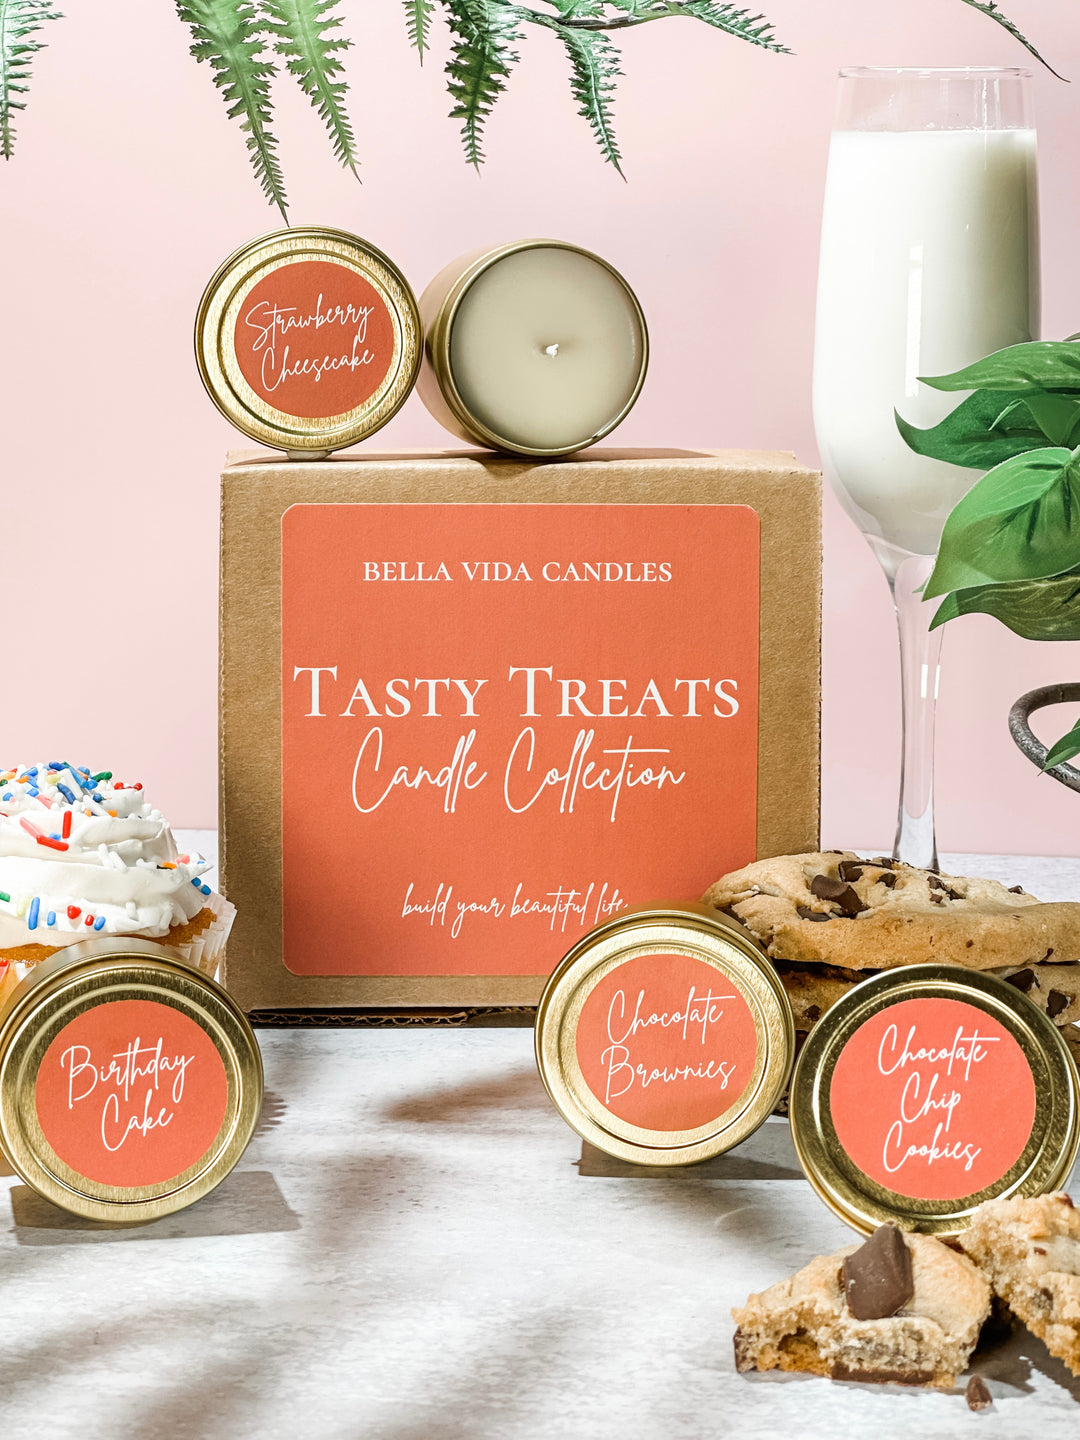 Tasty Treats Soy Candle Sniffer Box